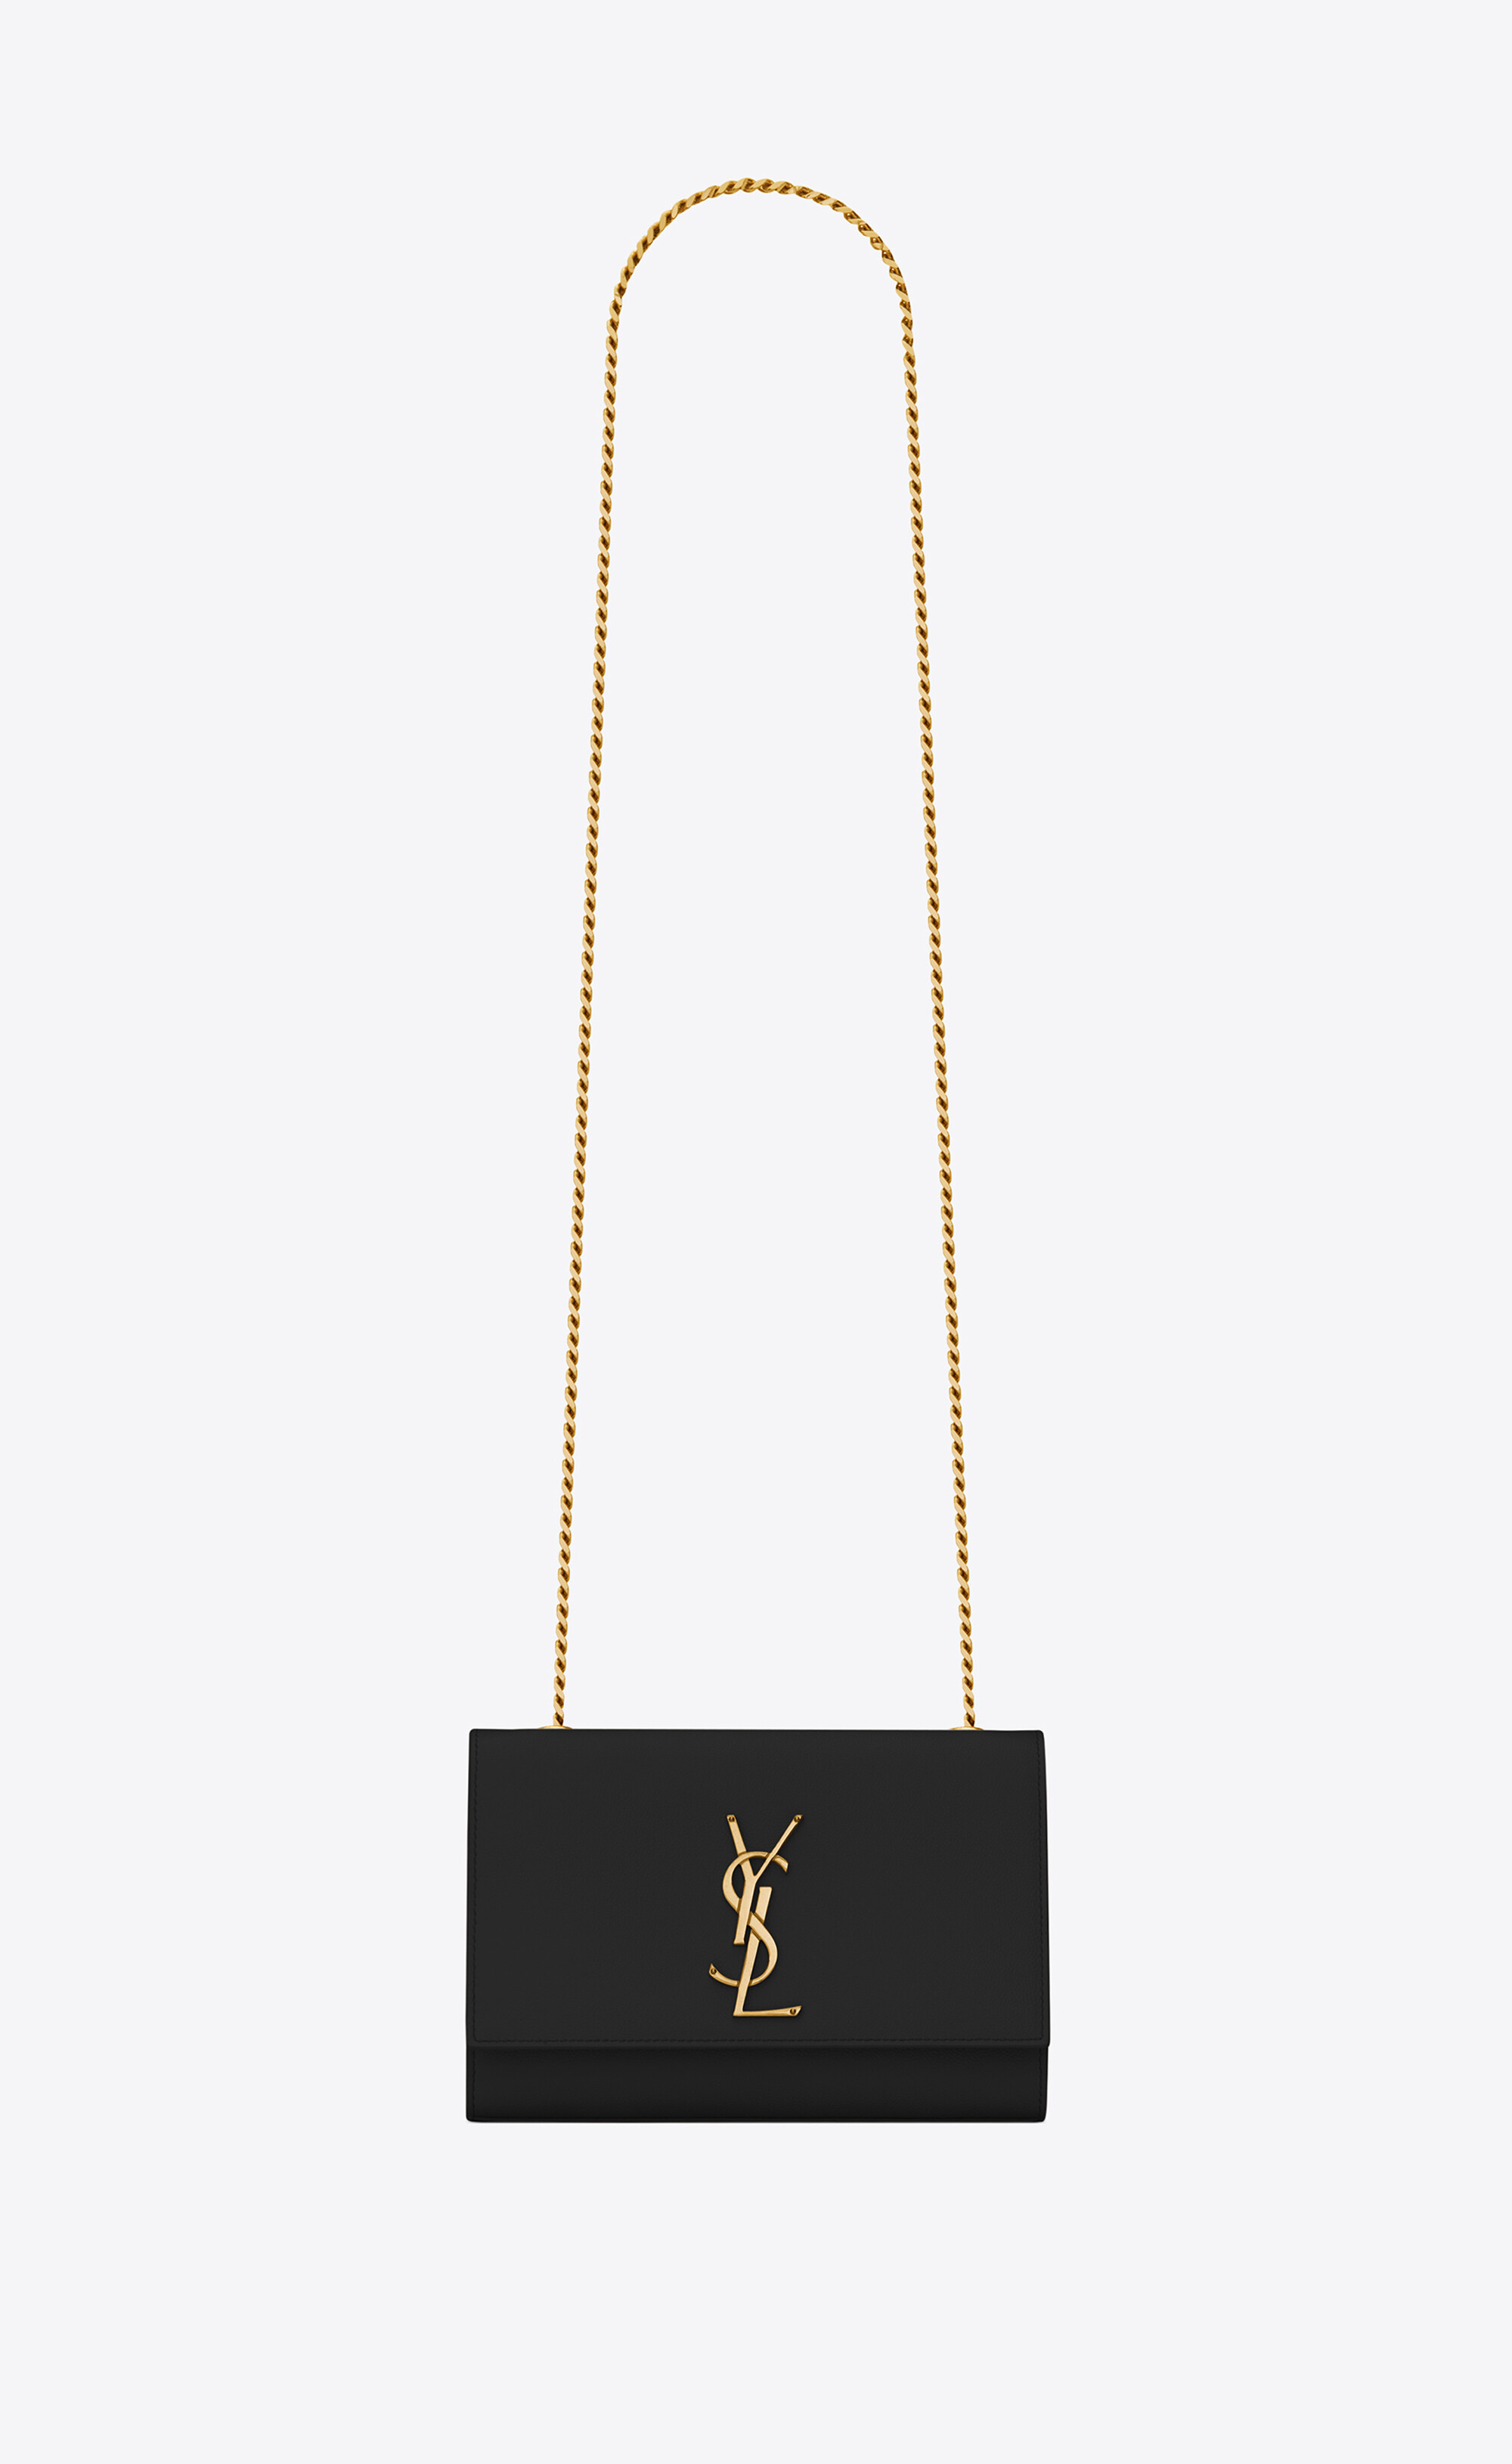 Ysl Chain Strap Online Store, UP TO 50% OFF | www.aramanatural.es